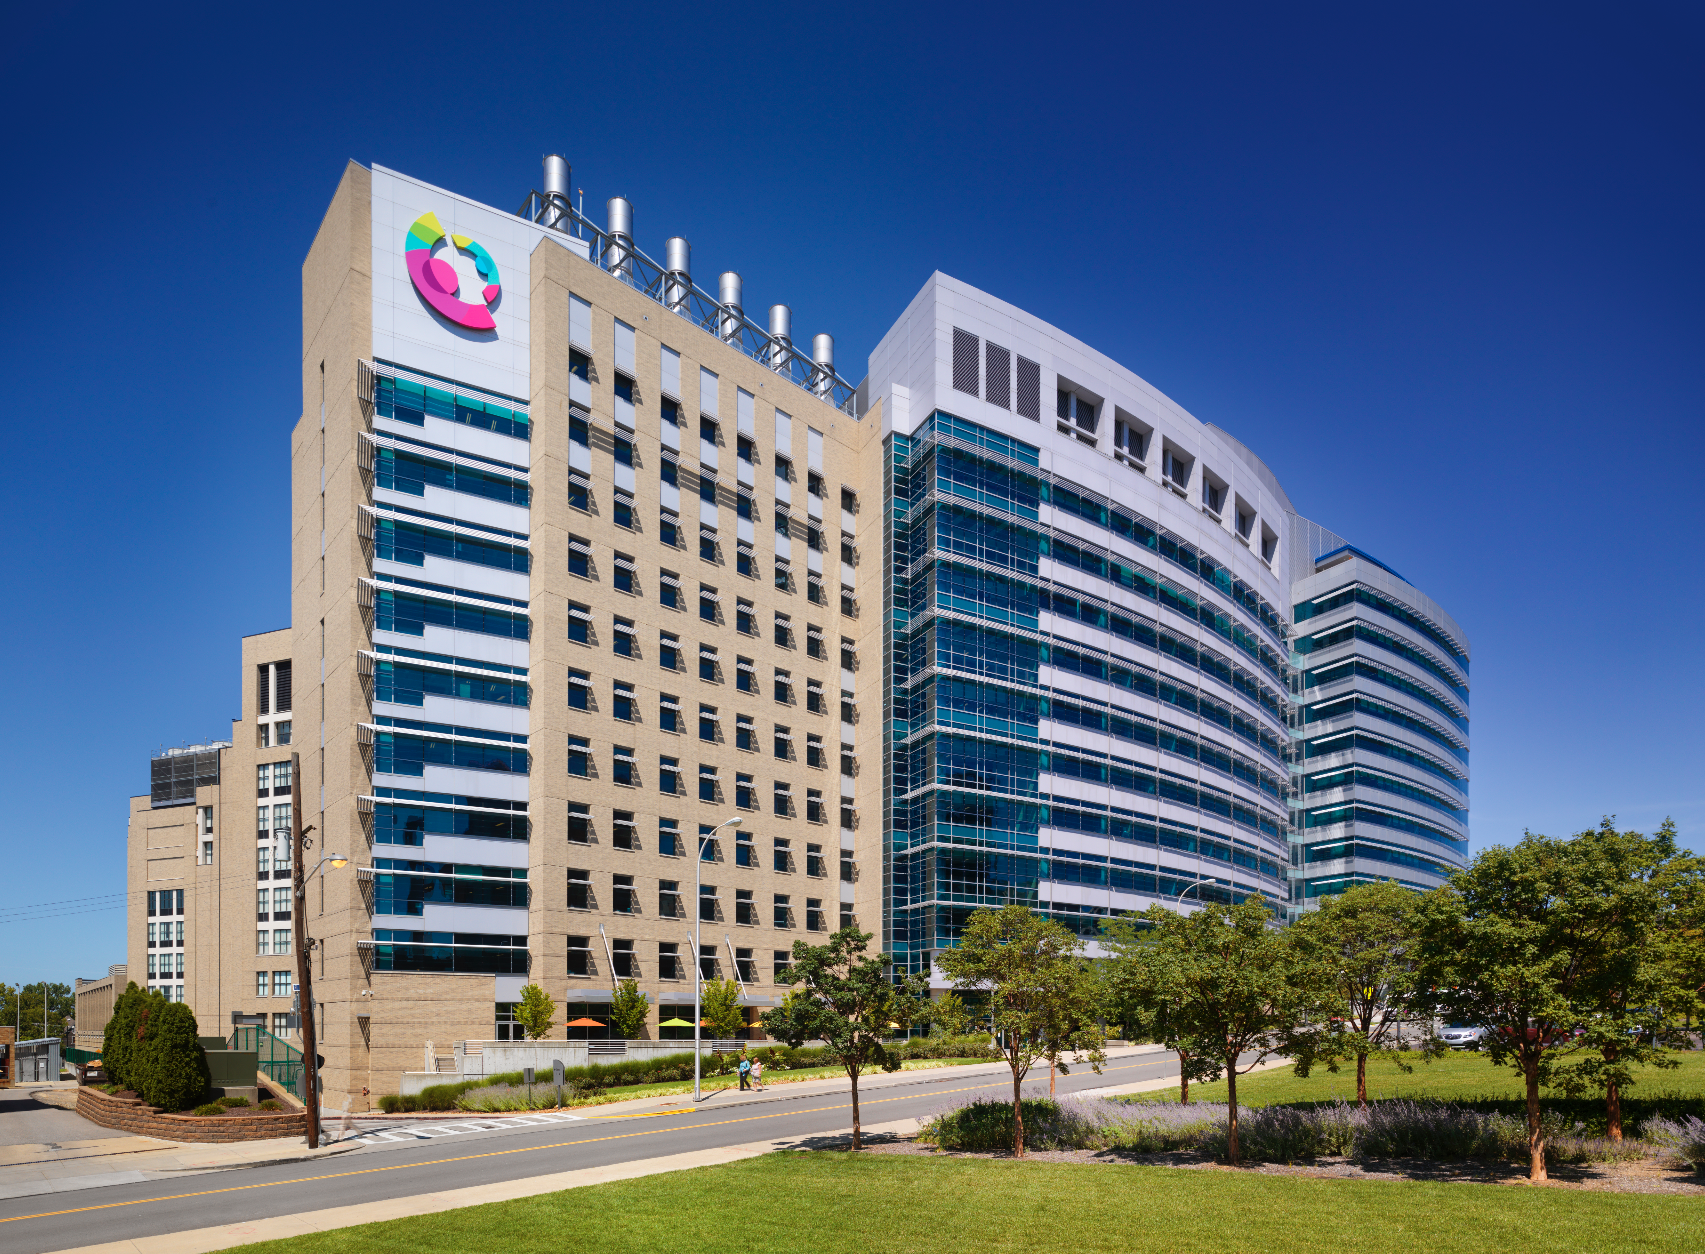 Data Management and Coordinating Centers at the Cincinnati Children's Hospital Medical Center